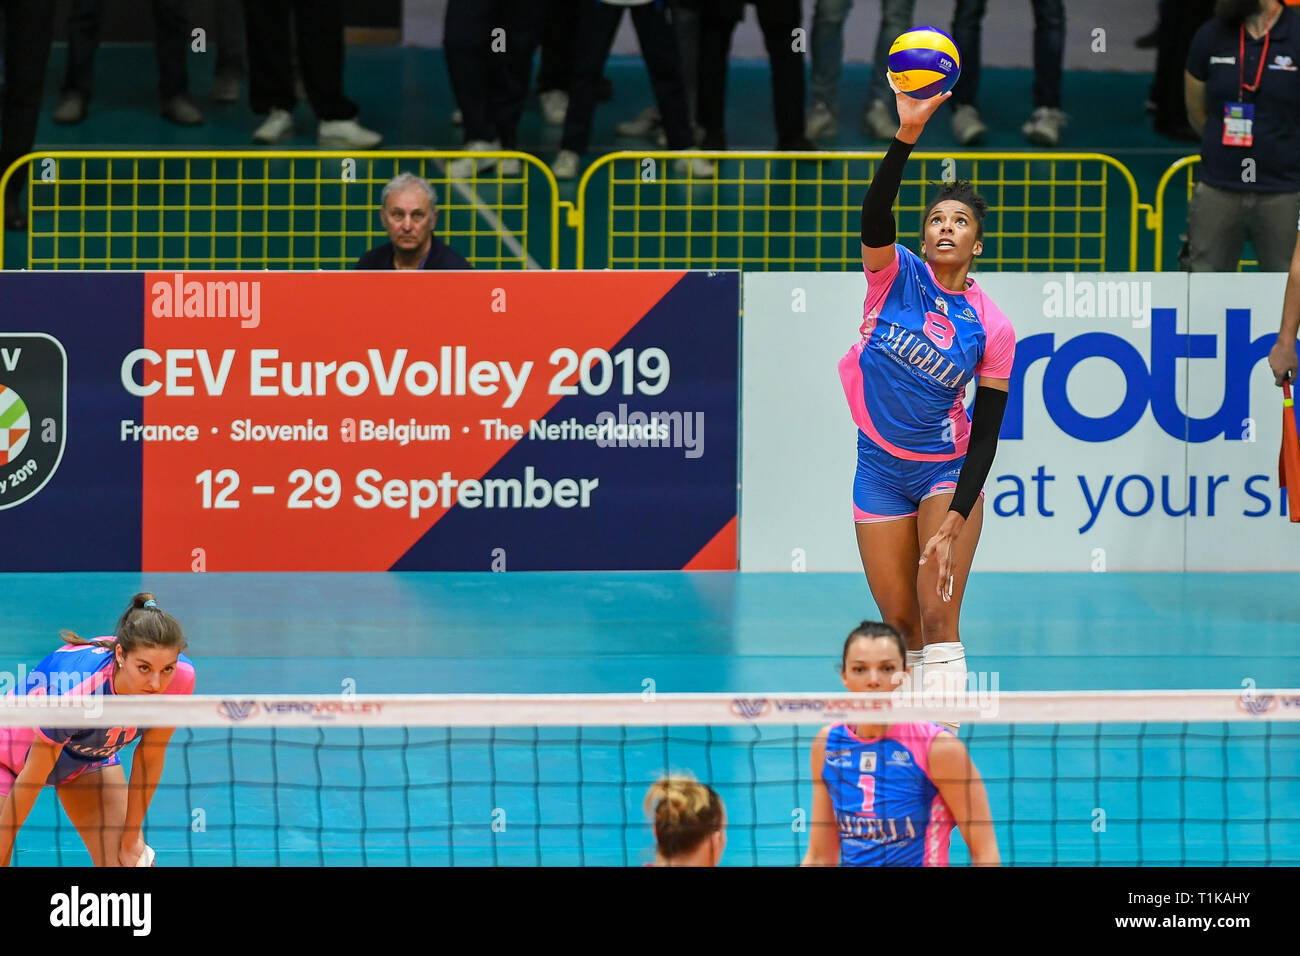 Candy Arena, Monza, Italy. 27th March, 2019. CEV Volleyball Challenge Cup women, Final, 2nd leg. Rachael Adams of Saugella Monza during the match between Saugella Monza and Aydin BBSK at the Candy Arena Italy.  Credit: Claudio Grassi/Alamy Live News Stock Photo